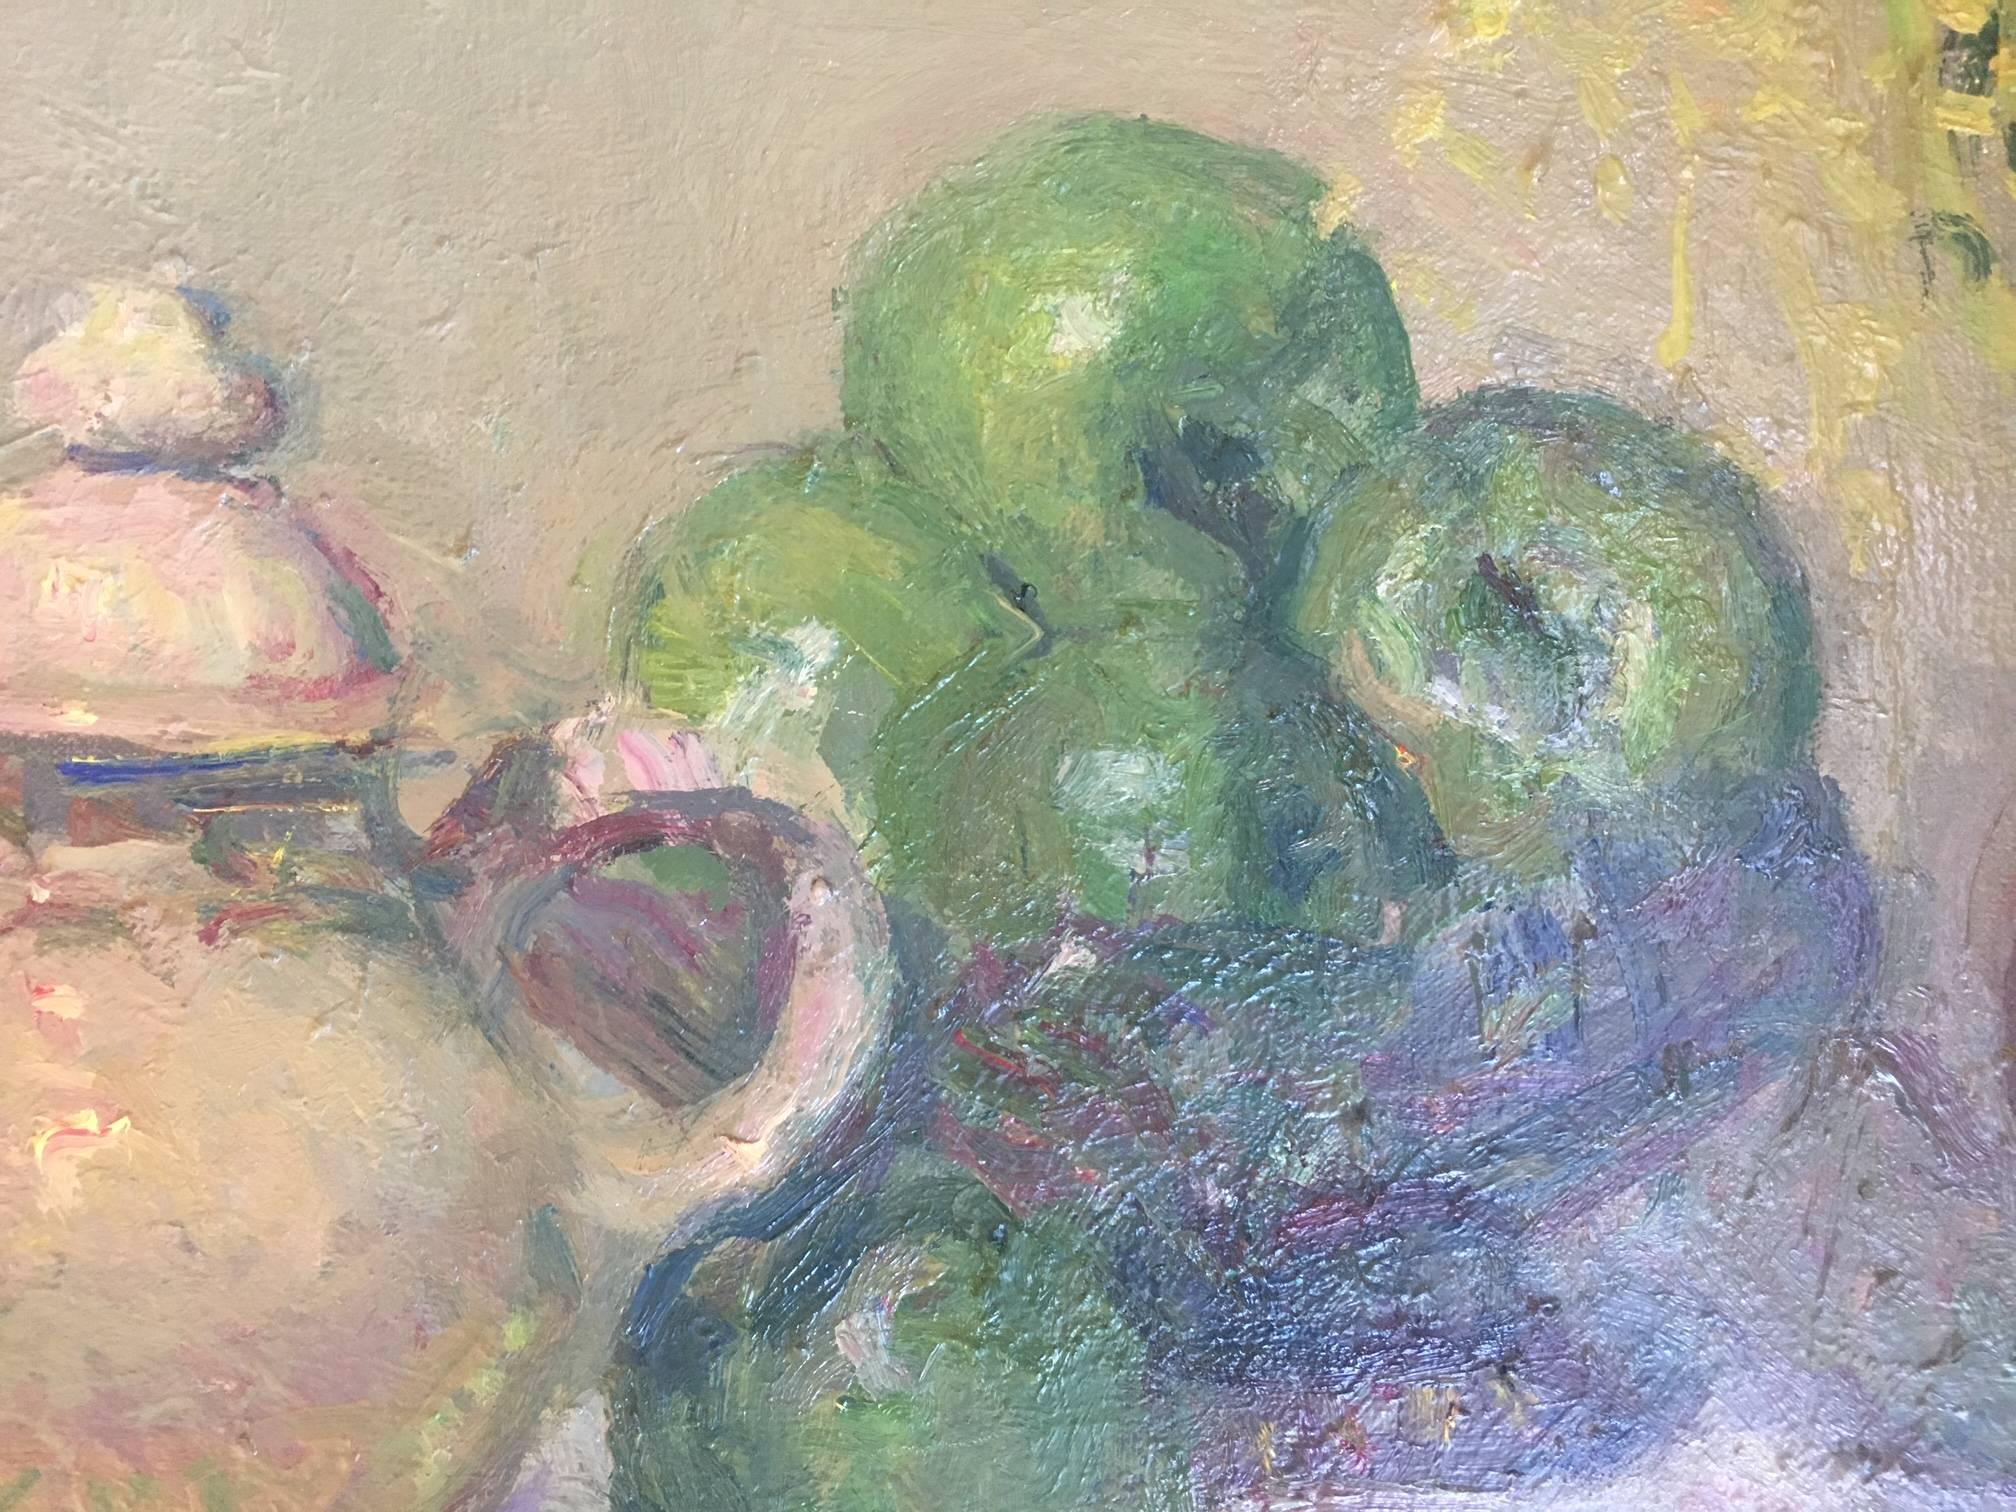 Still life green apples original impressionist oil canvas painting.
Sola PUIG, Joan    (Barcelona 1950 )

Joan SOLÁ paints in a natural way, which reflects the Old Masters, soaking up the colour, air, smell and the pure scent of his environment. He